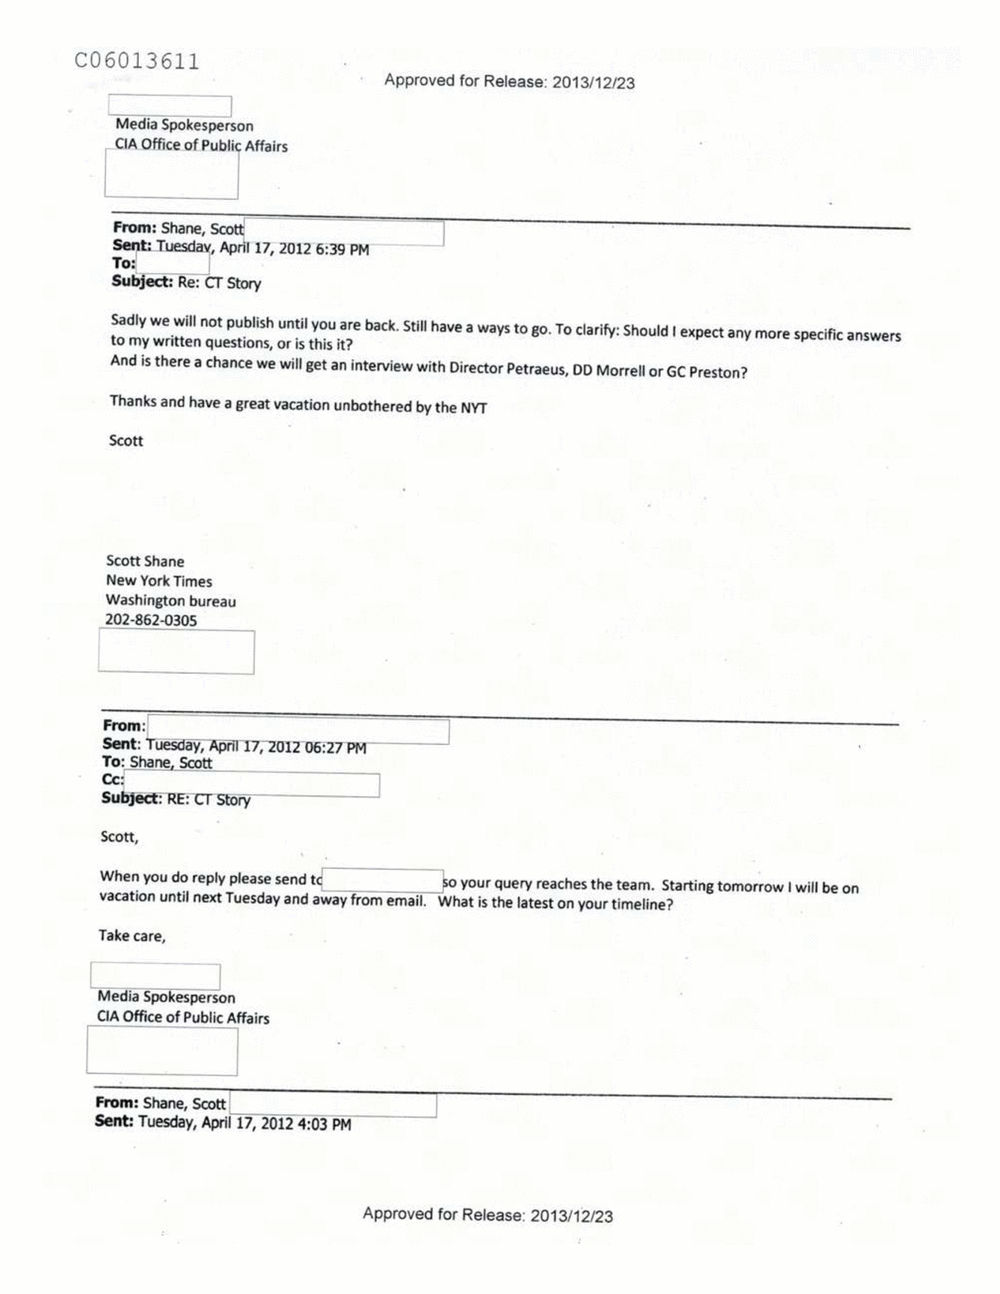 Page 428 from Email Correspondence Between Reporters and CIA Flacks